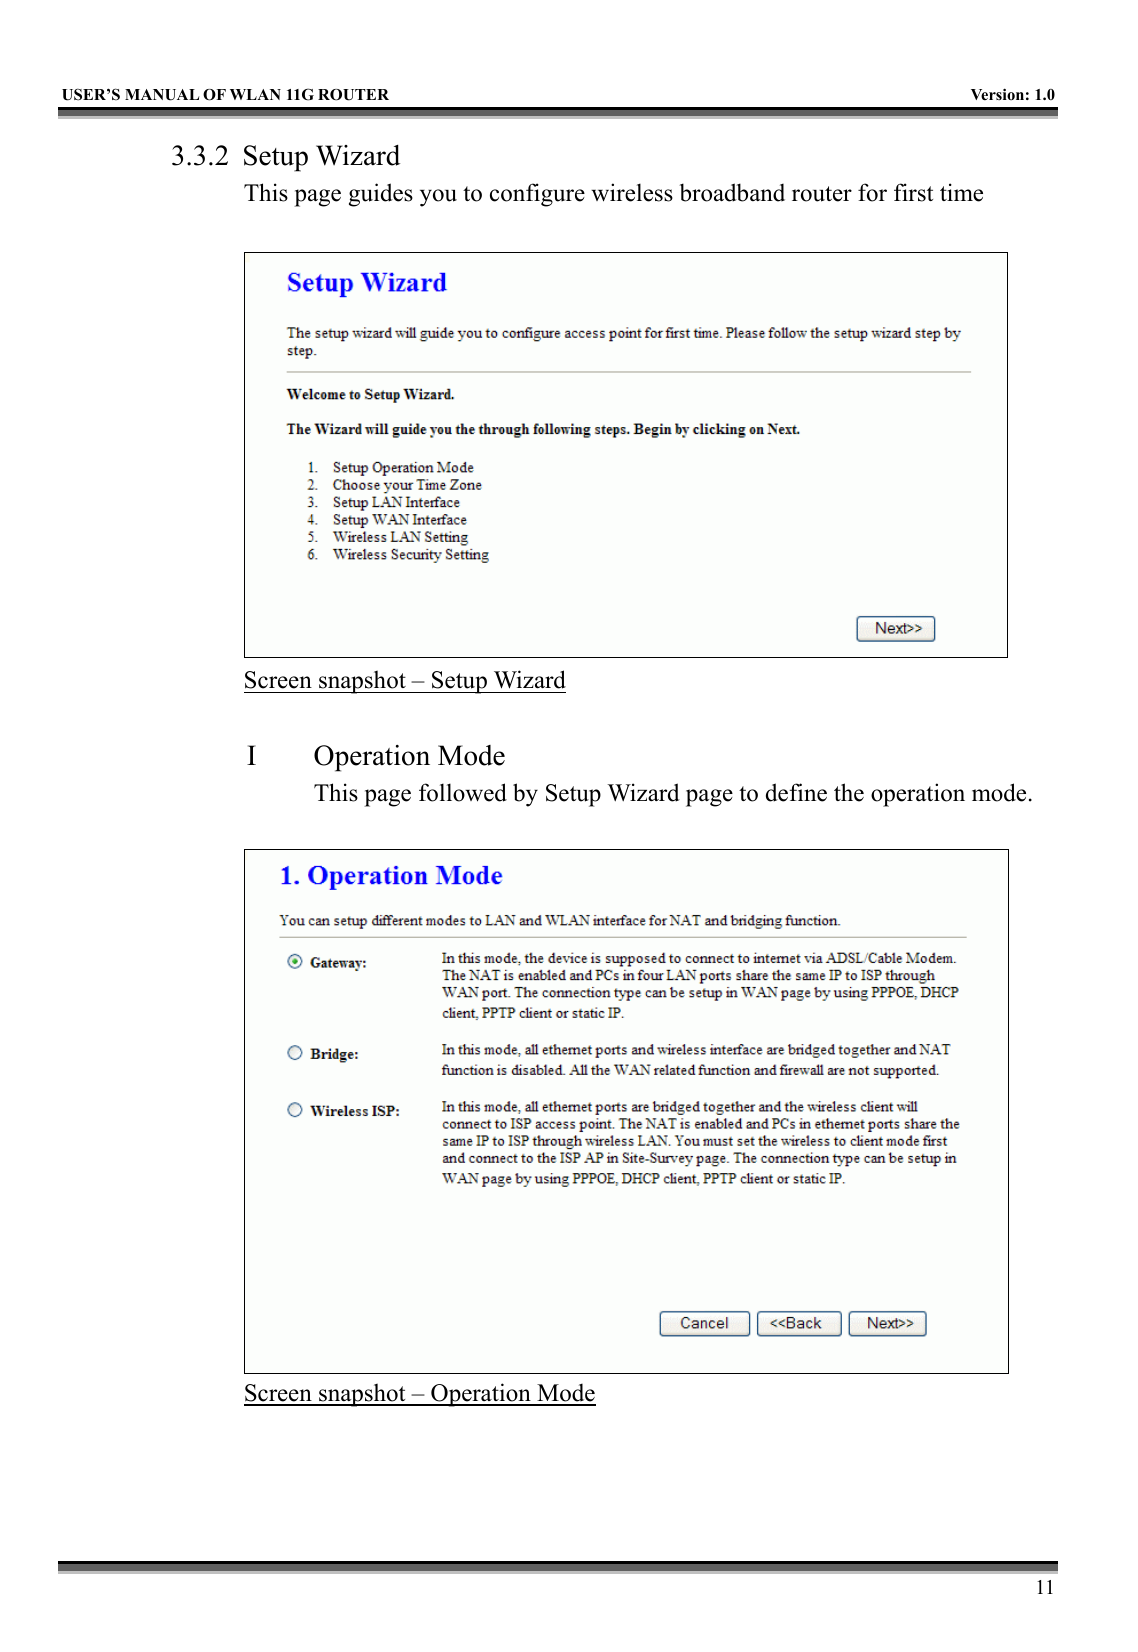   USER’S MANUAL OF WLAN 11G ROUTER    Version: 1.0     11 3.3.2 Setup Wizard This page guides you to configure wireless broadband router for first time   Screen snapshot – Setup Wizard  I Operation Mode This page followed by Setup Wizard page to define the operation mode.   Screen snapshot – Operation Mode 